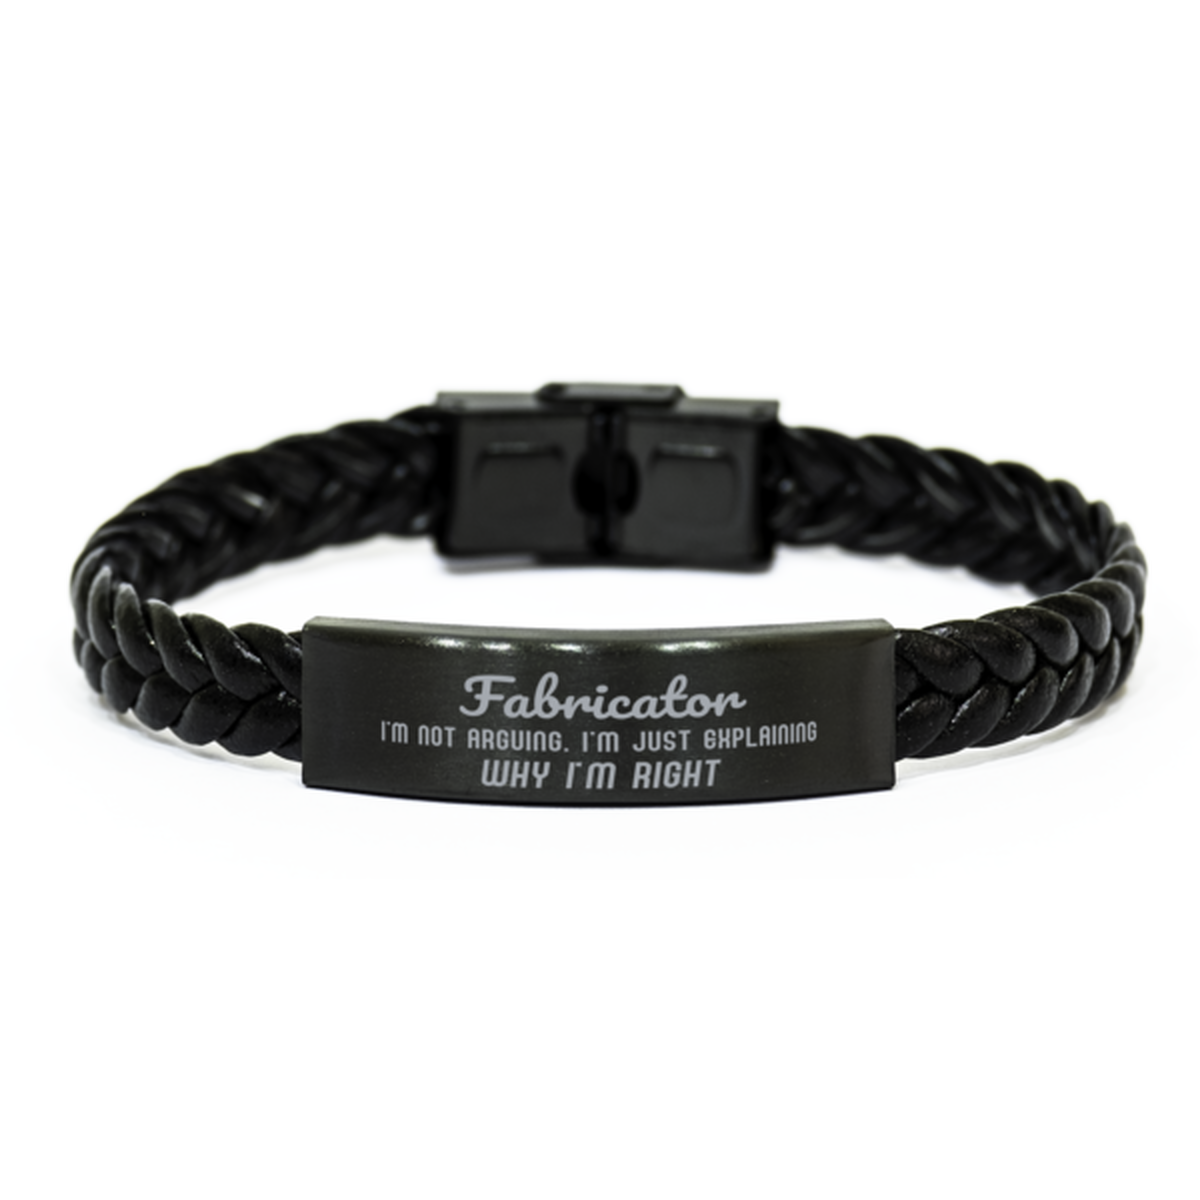 Fabricator I'm not Arguing. I'm Just Explaining Why I'm RIGHT Braided Leather Bracelet, Graduation Birthday Christmas Fabricator Gifts For Fabricator Funny Saying Quote Present for Men Women Coworker